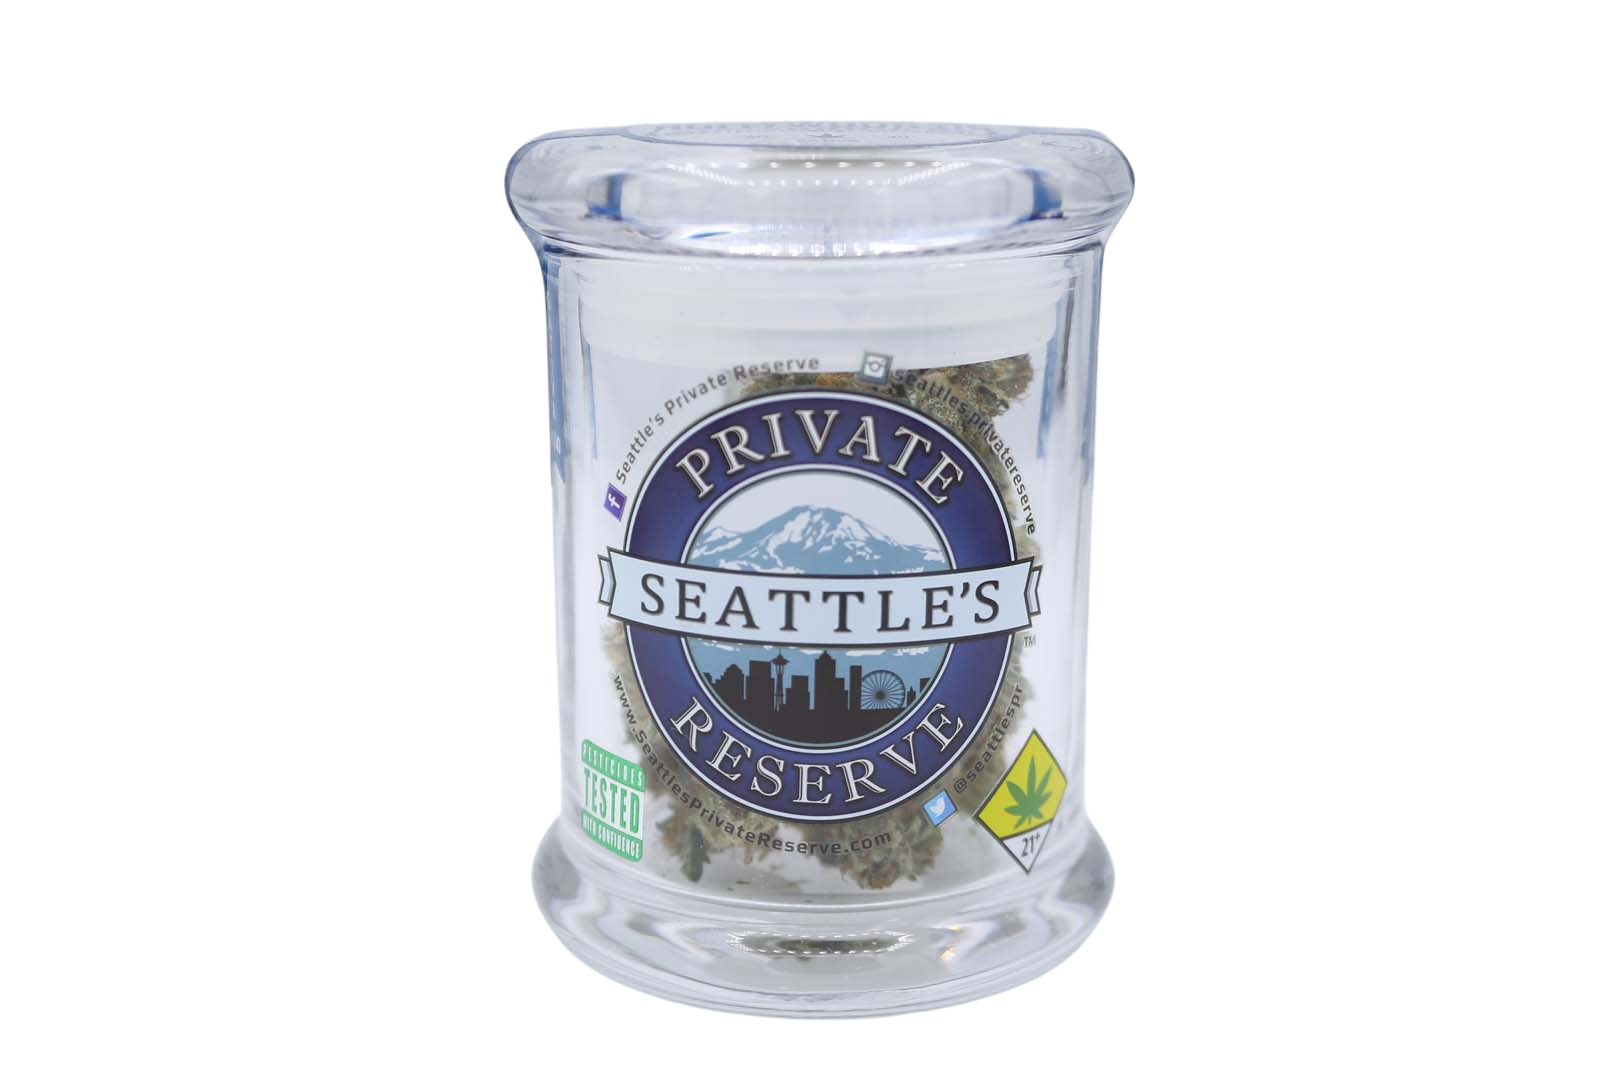 Seattles Private Reserve Hood Candies